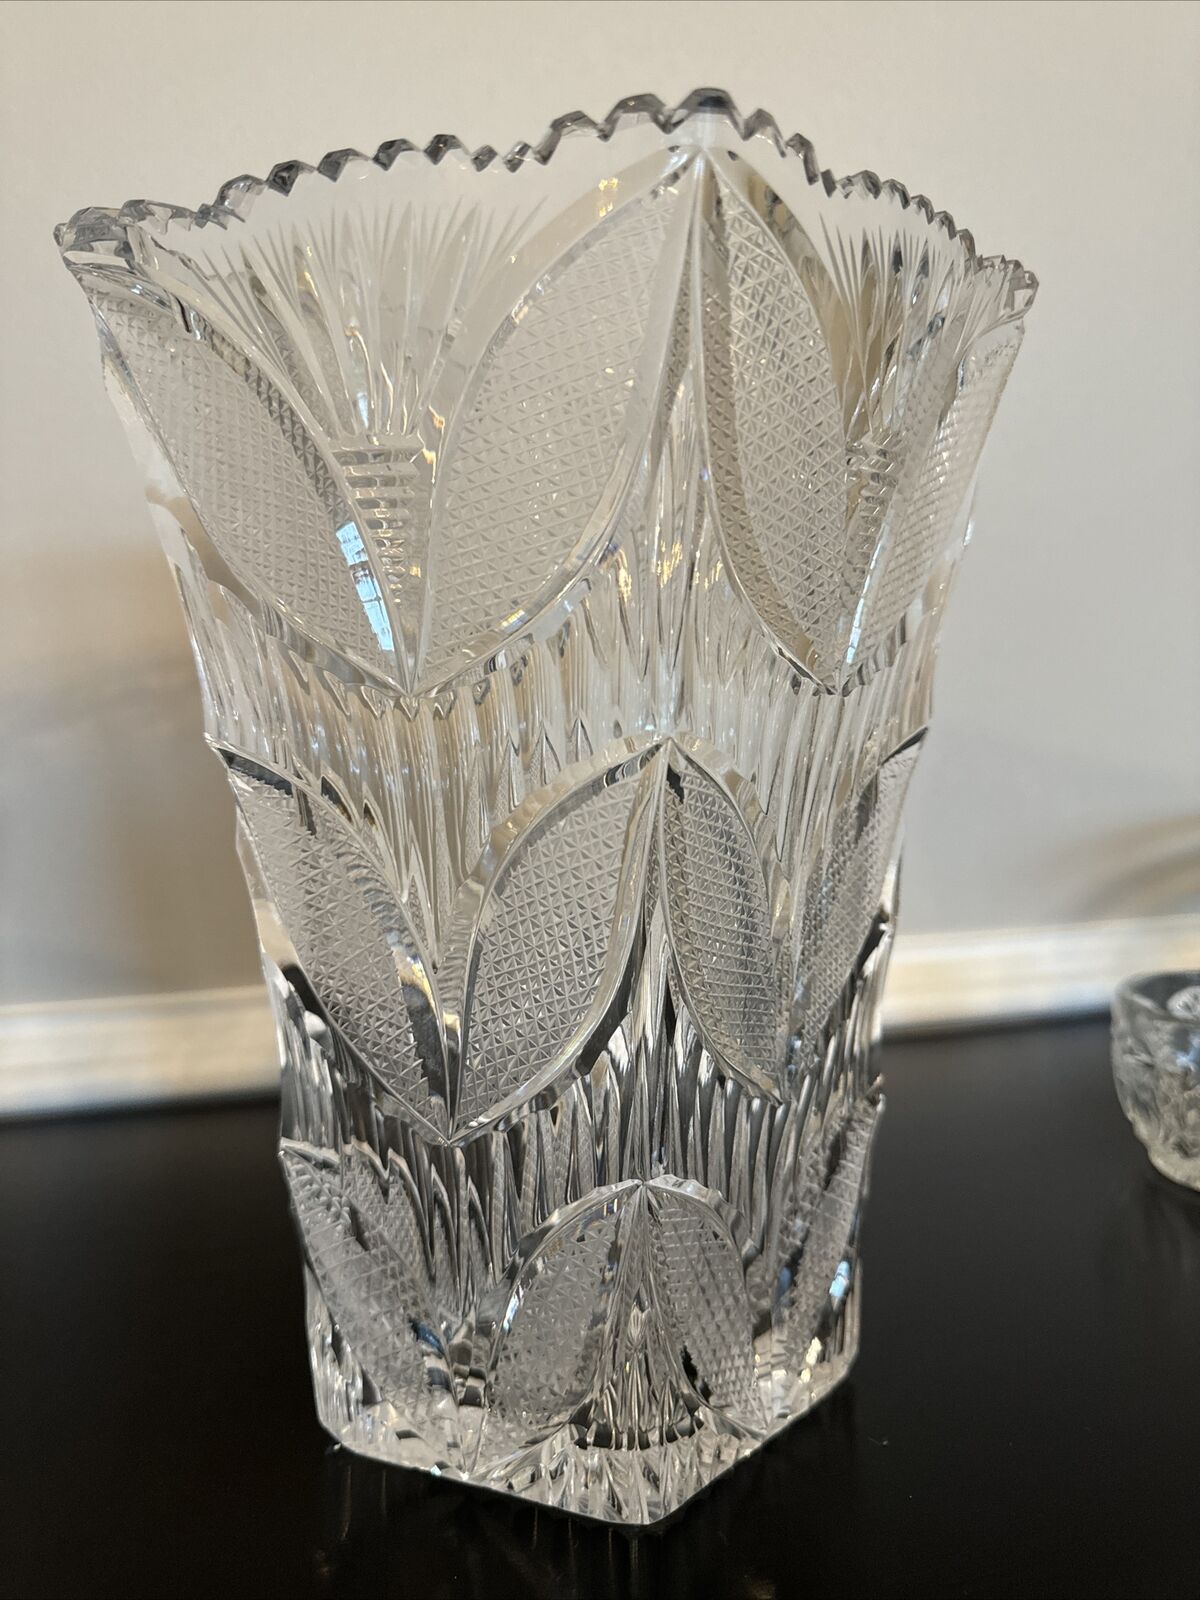 waterford crystal vase large clear